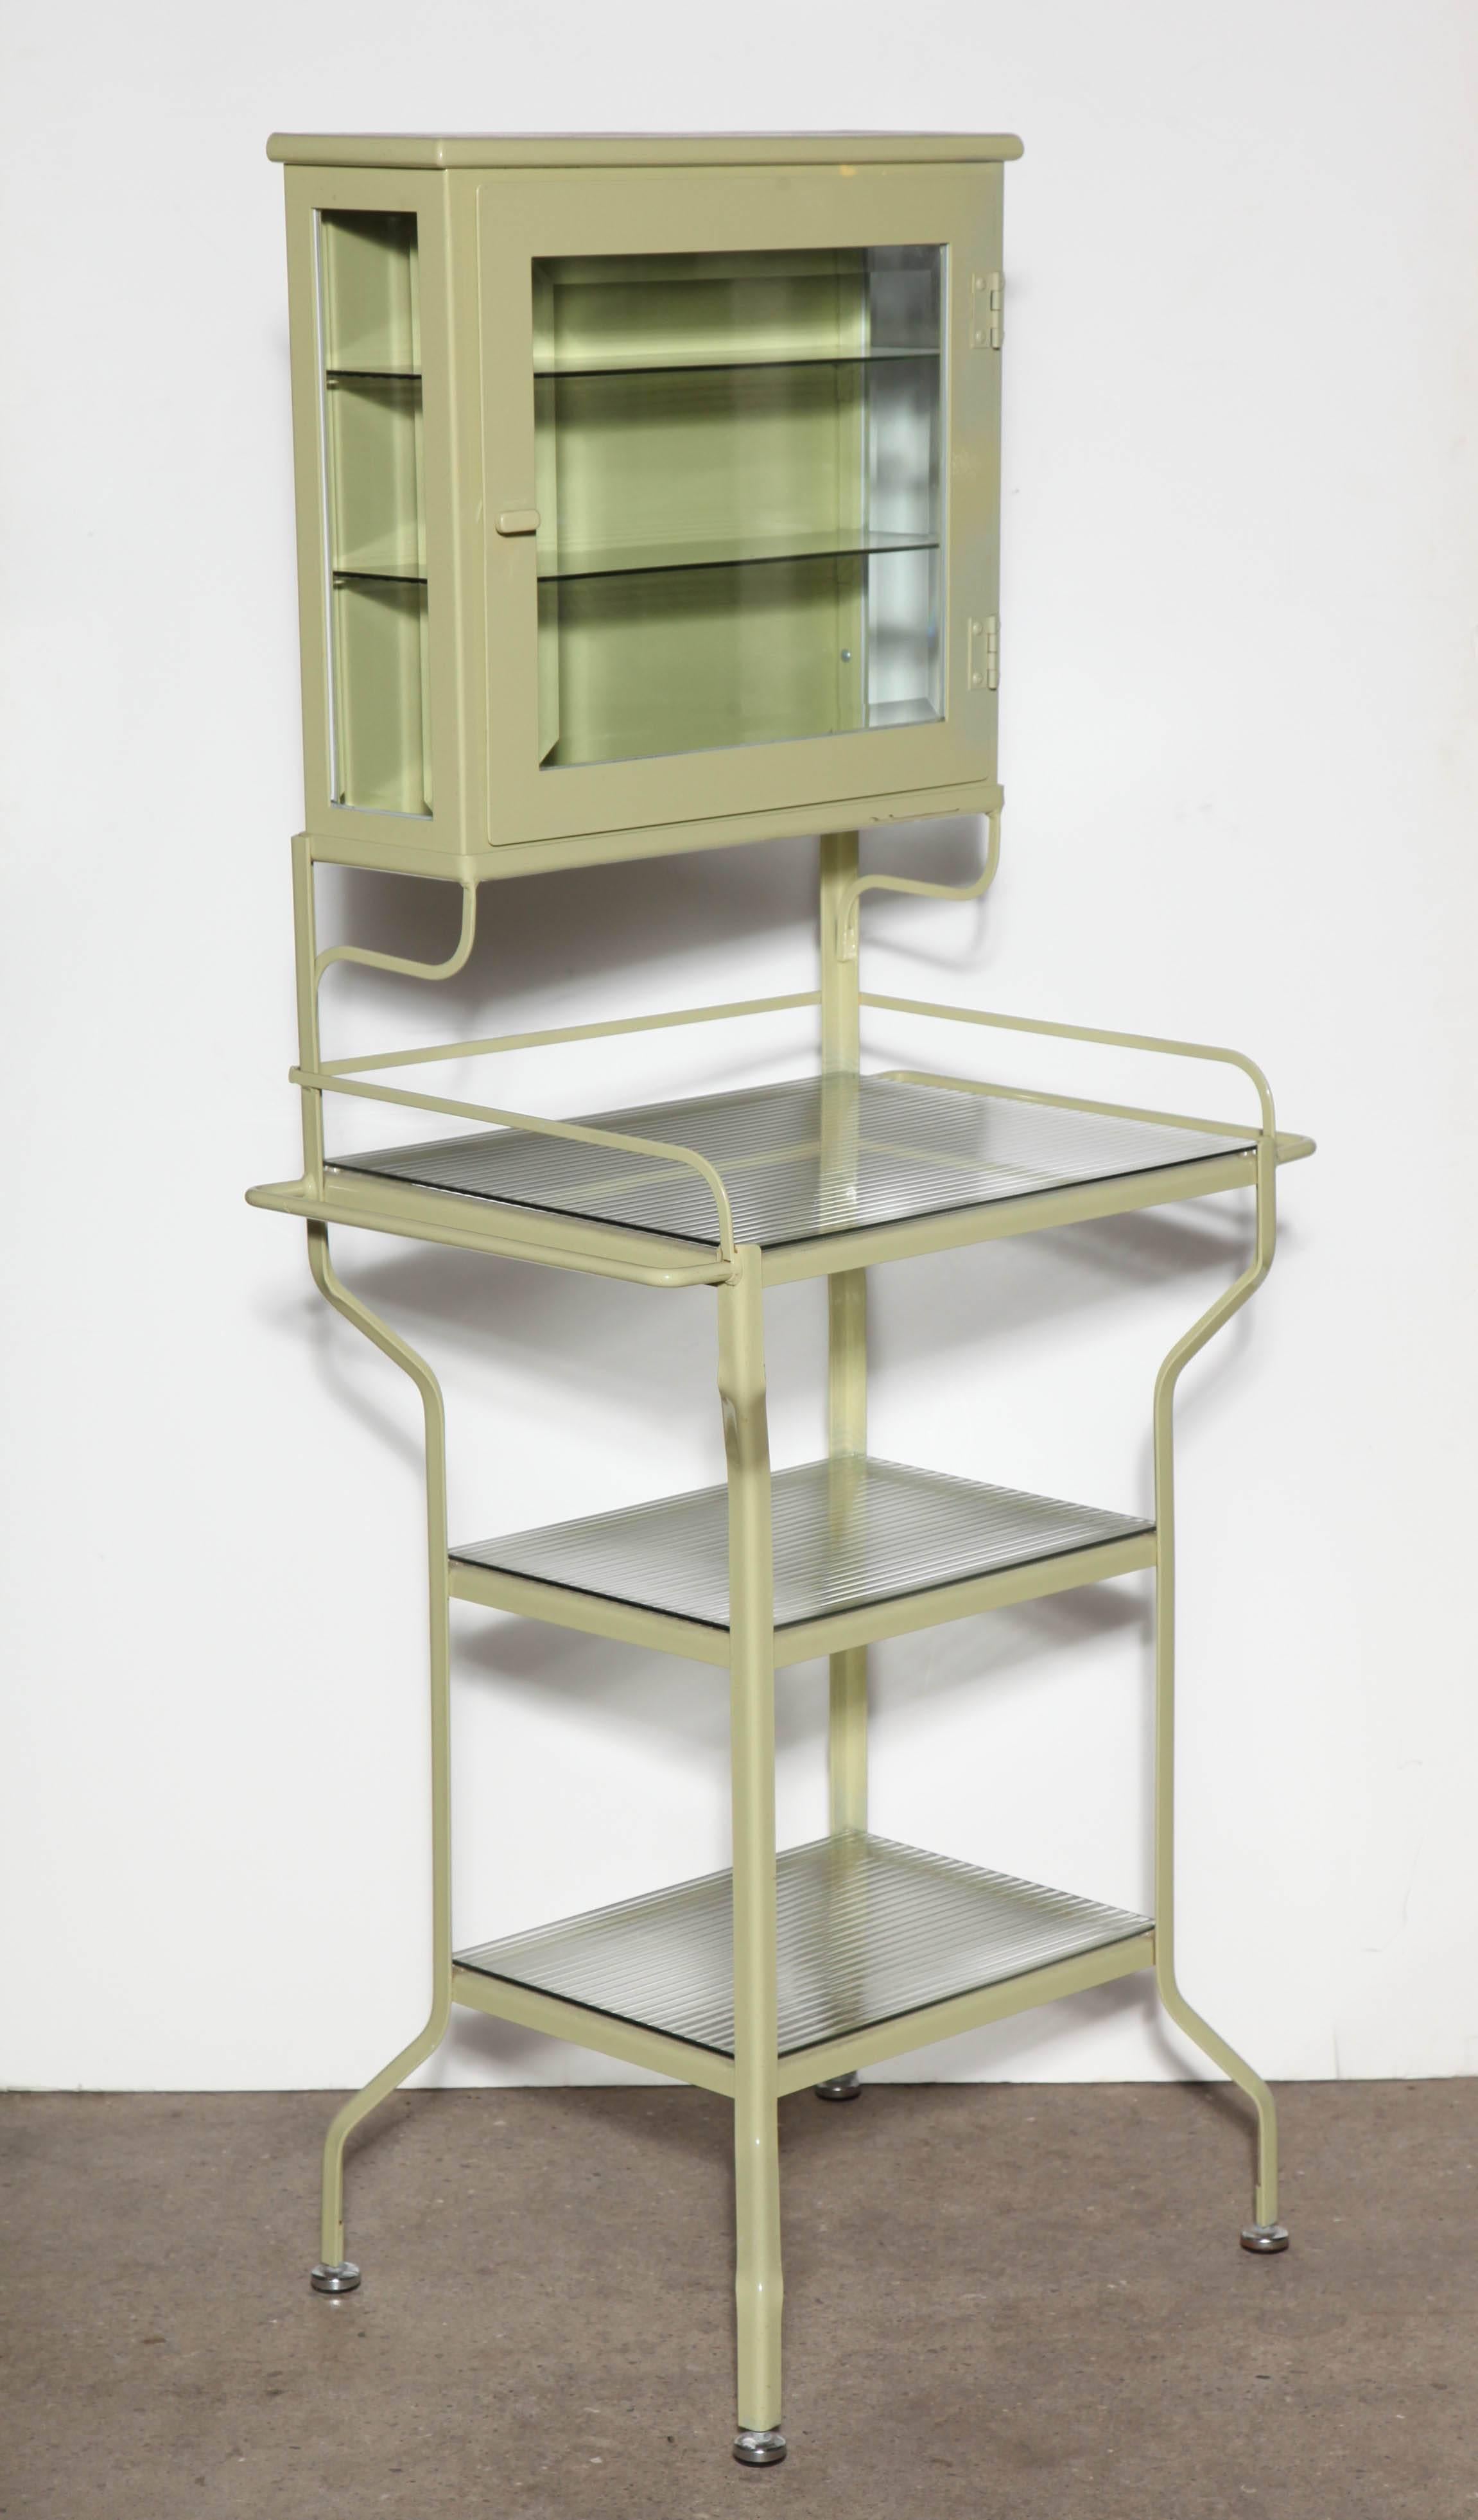 Edwardian Pale Green Enamel & Glass Storage Cabinet with Five Optical Glass Shelves, 1920s